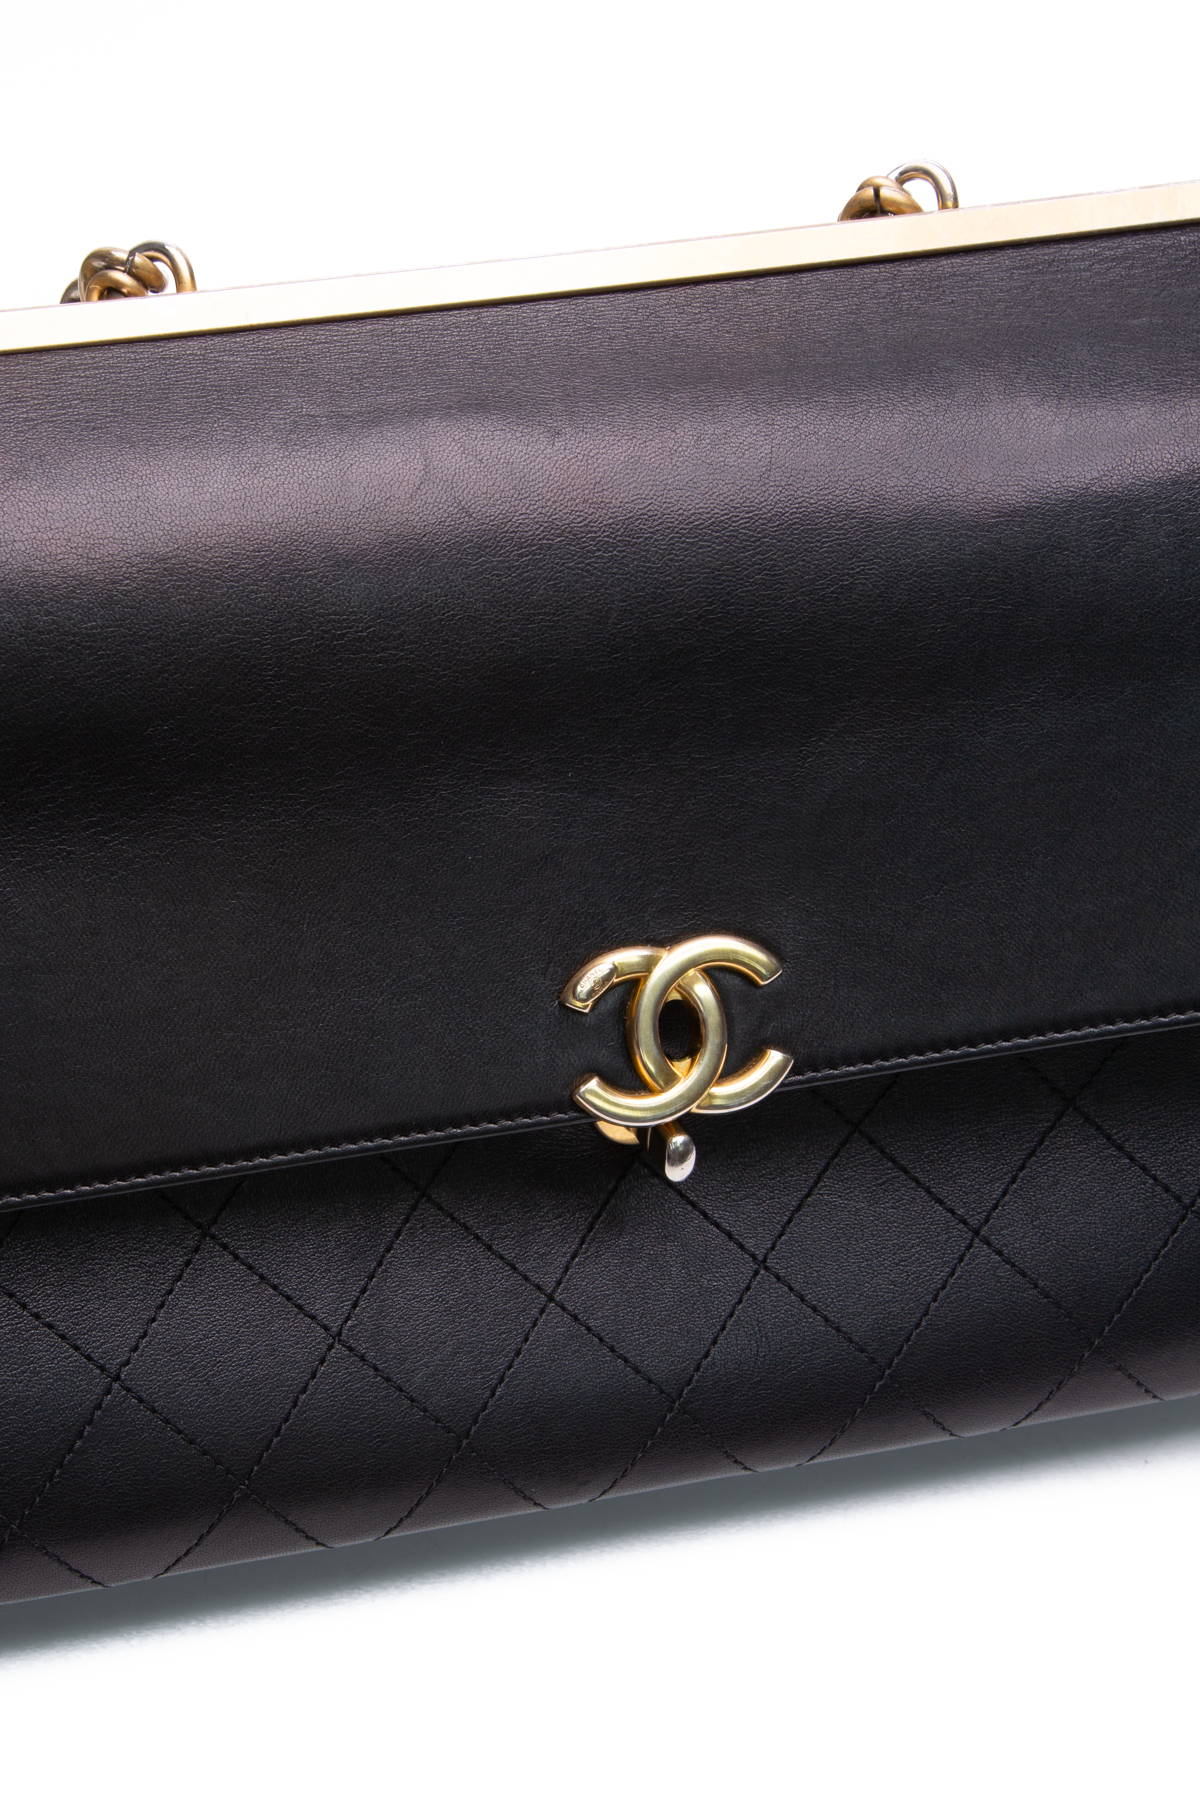 Chanel Coco Luxe Bag